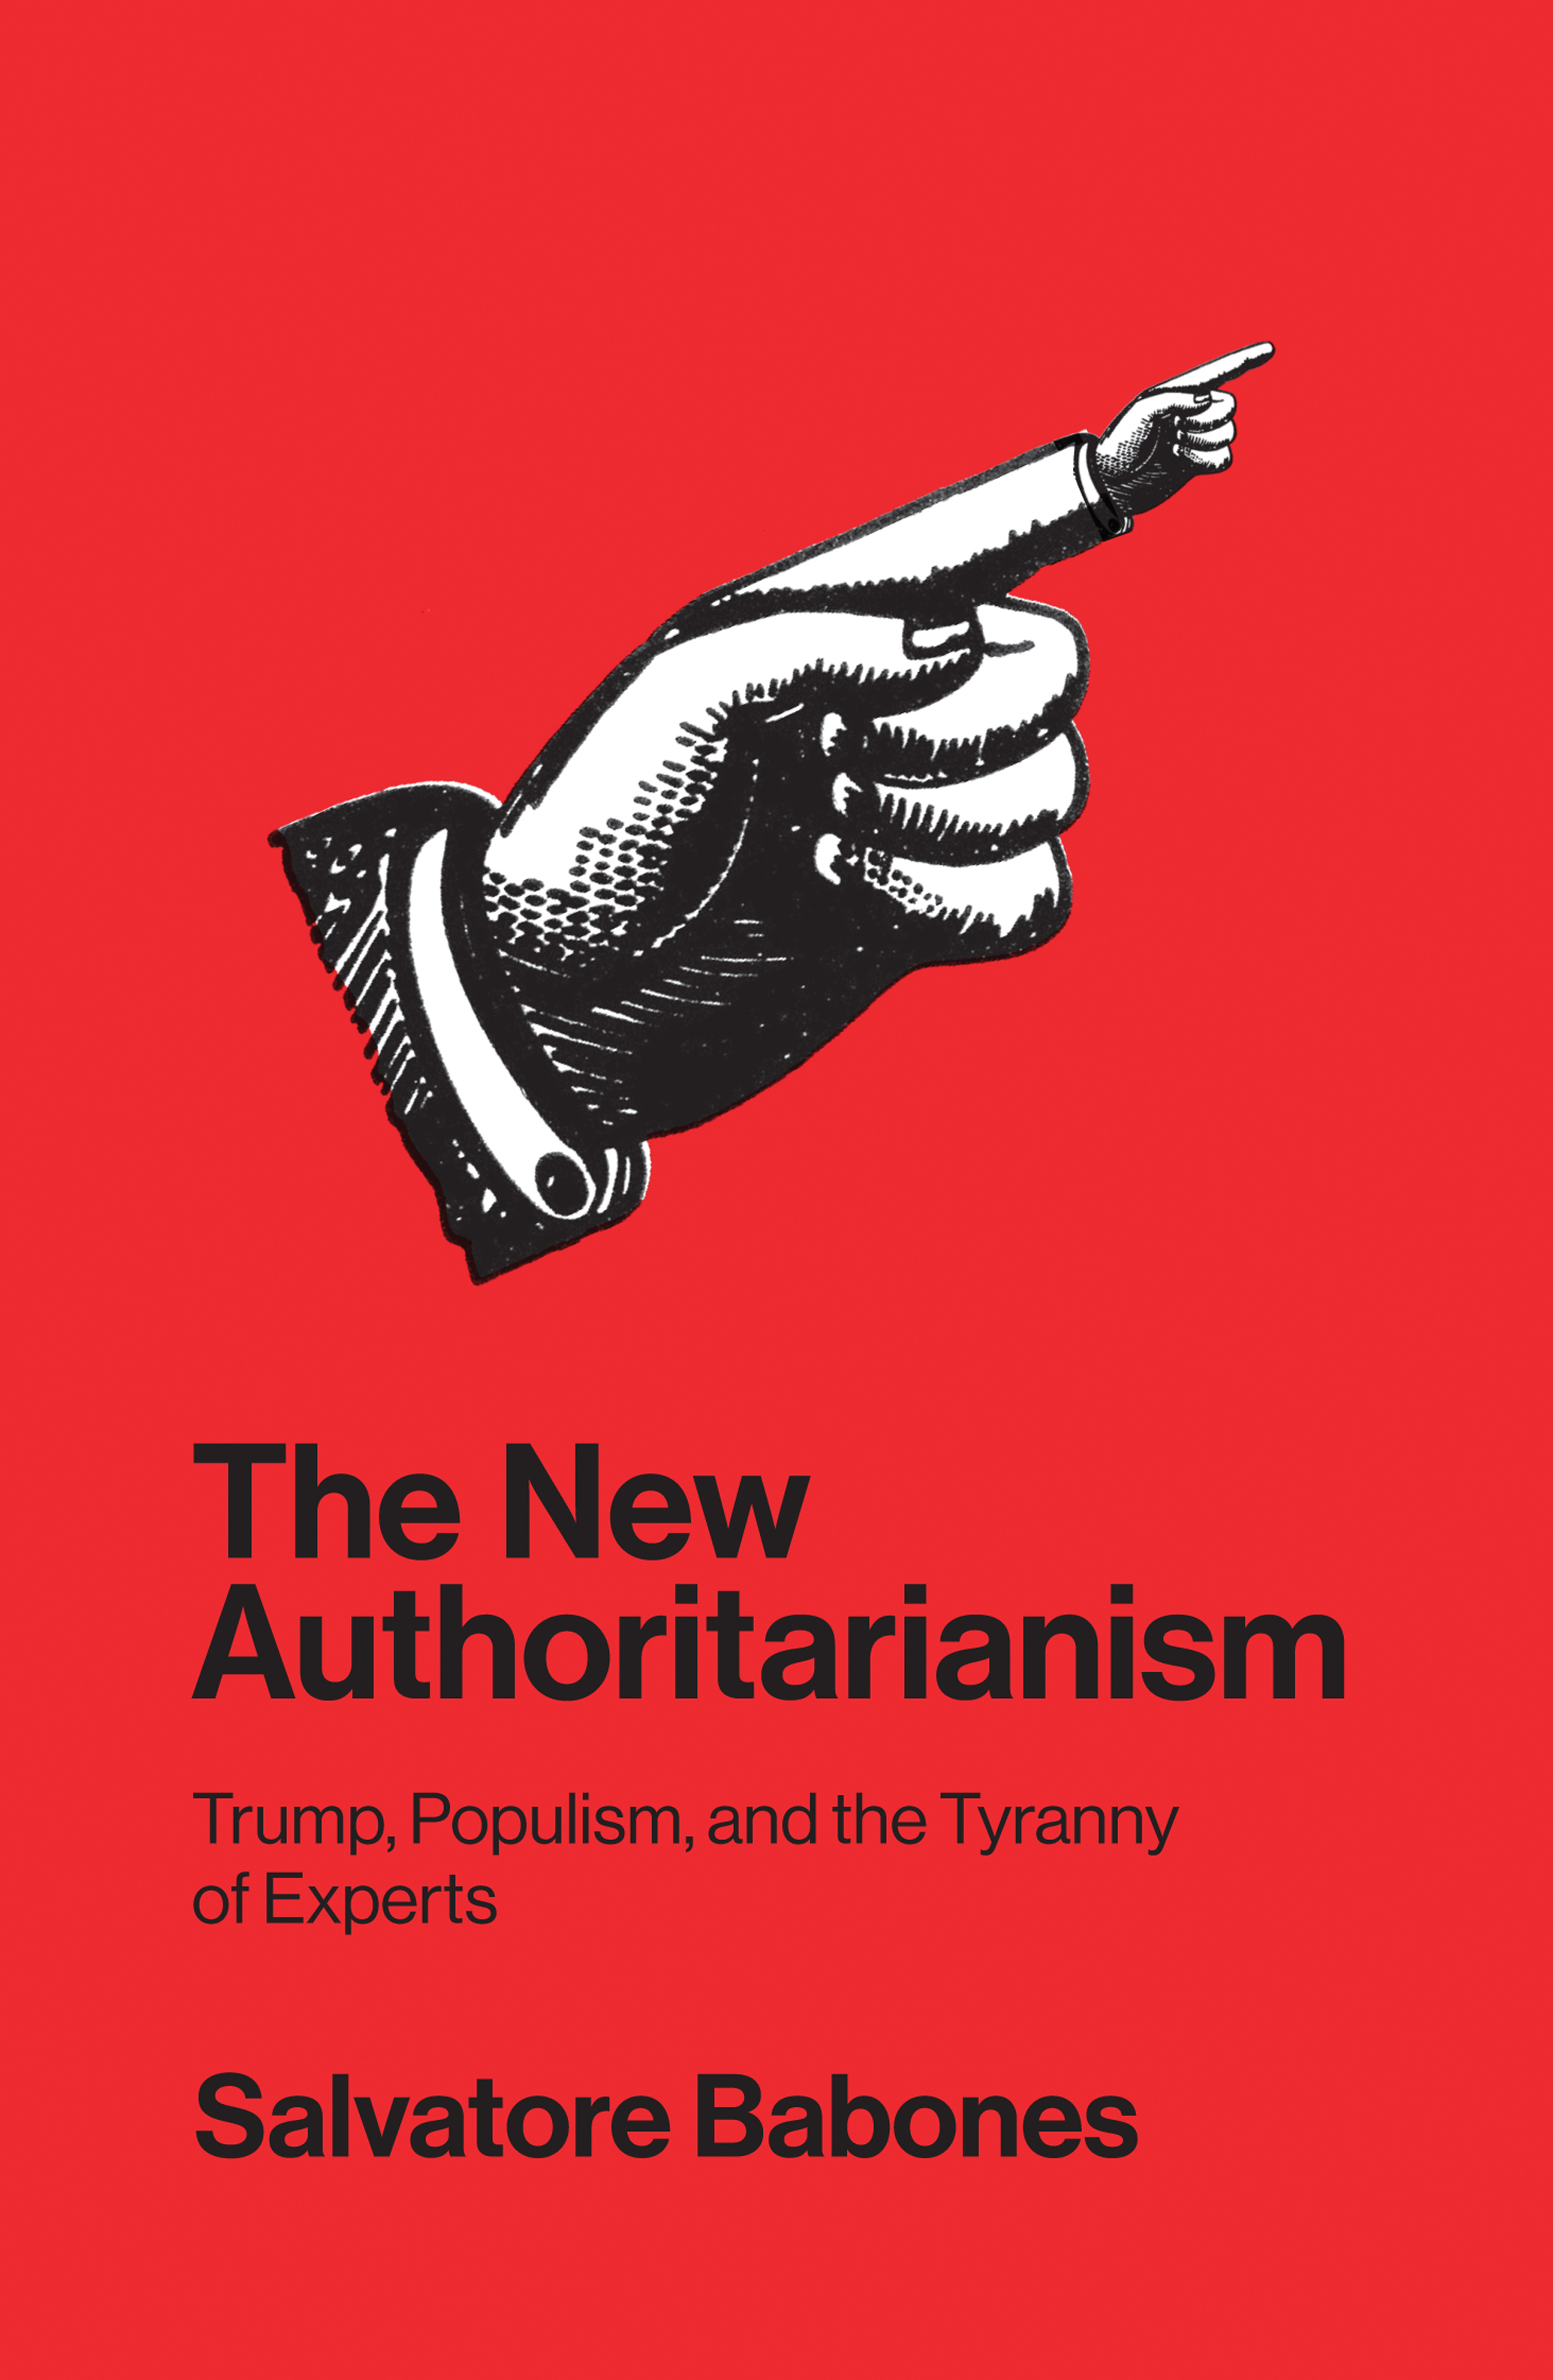 cover for The New Authoritarianism Trump, Populism, and the Tyranny of Experts by Salvatore Babones